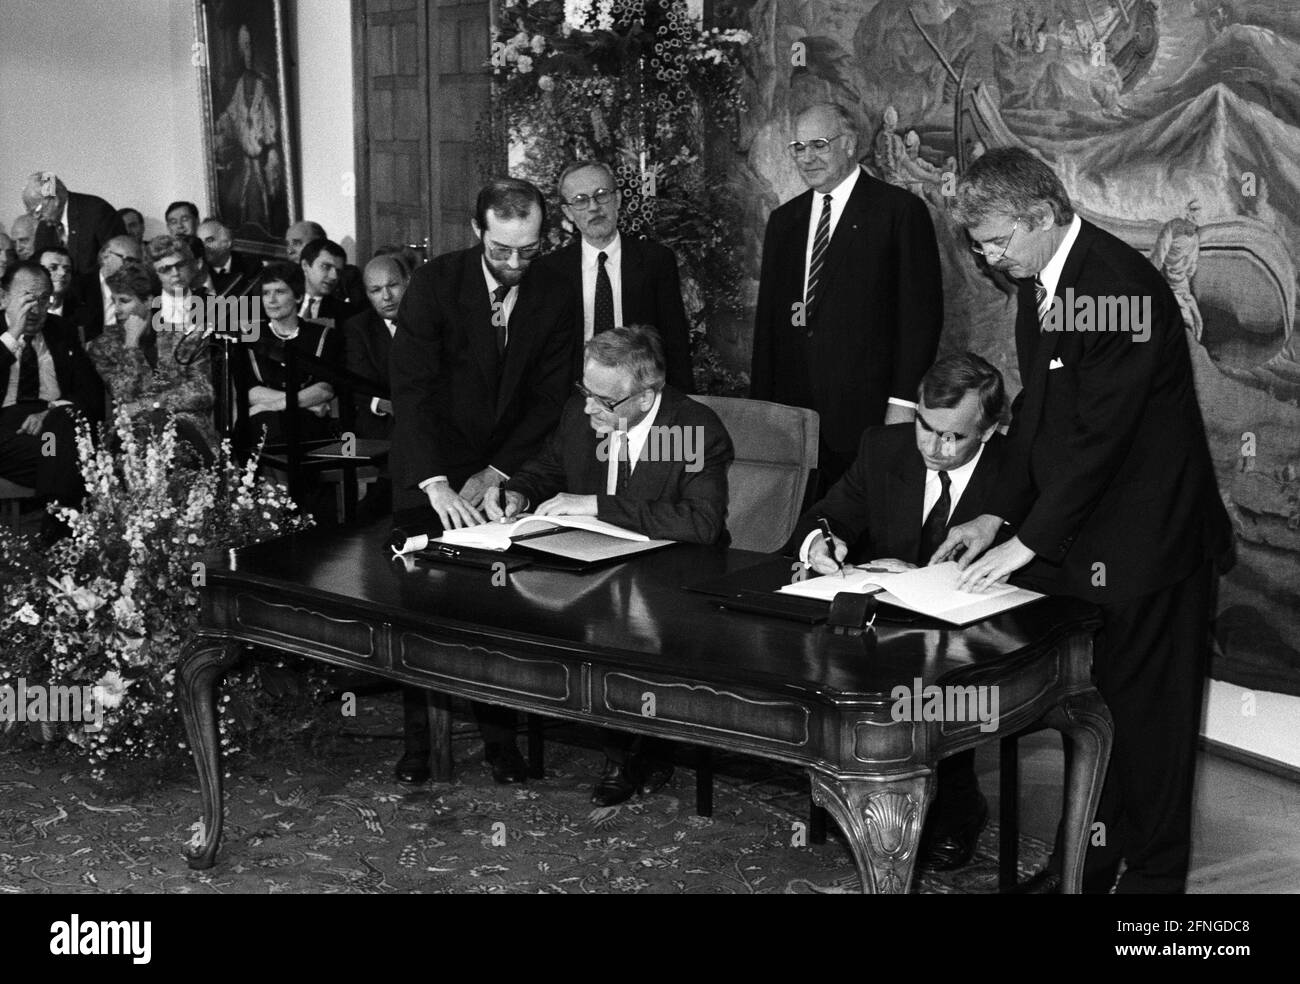 Germany, Bonn, 18.05.1990 Archive No.: 16-39-25 State Treaty between FRG and GDR Photo: from left to right: GDR Prime Minister Lothar de Maiziere, Federal Chancellor Helmut Kohl, GDR Finance Minister Walter Romberg and Federal Finance Minister Theo Waigel [automated translation] Stock Photo